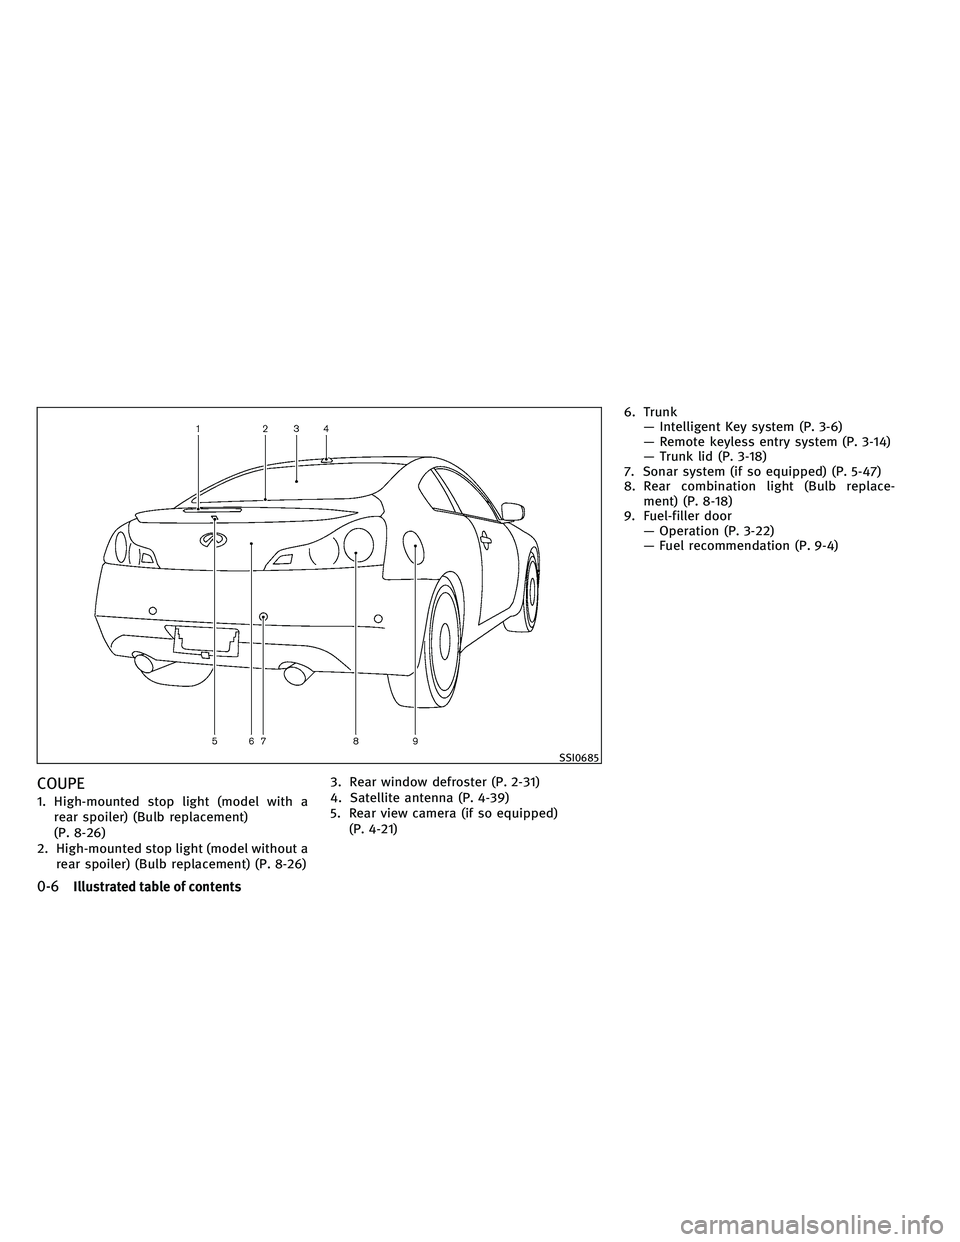 INFINITI G 2011  Owners Manual COUPE
1. High-mounted stop light (model with arear spoiler) (Bulb replacement)
(P. 8-26)
2. High-mounted stop light (model without a rear spoiler) (Bulb replacement) (P. 8-26) 3. Rear window defroster